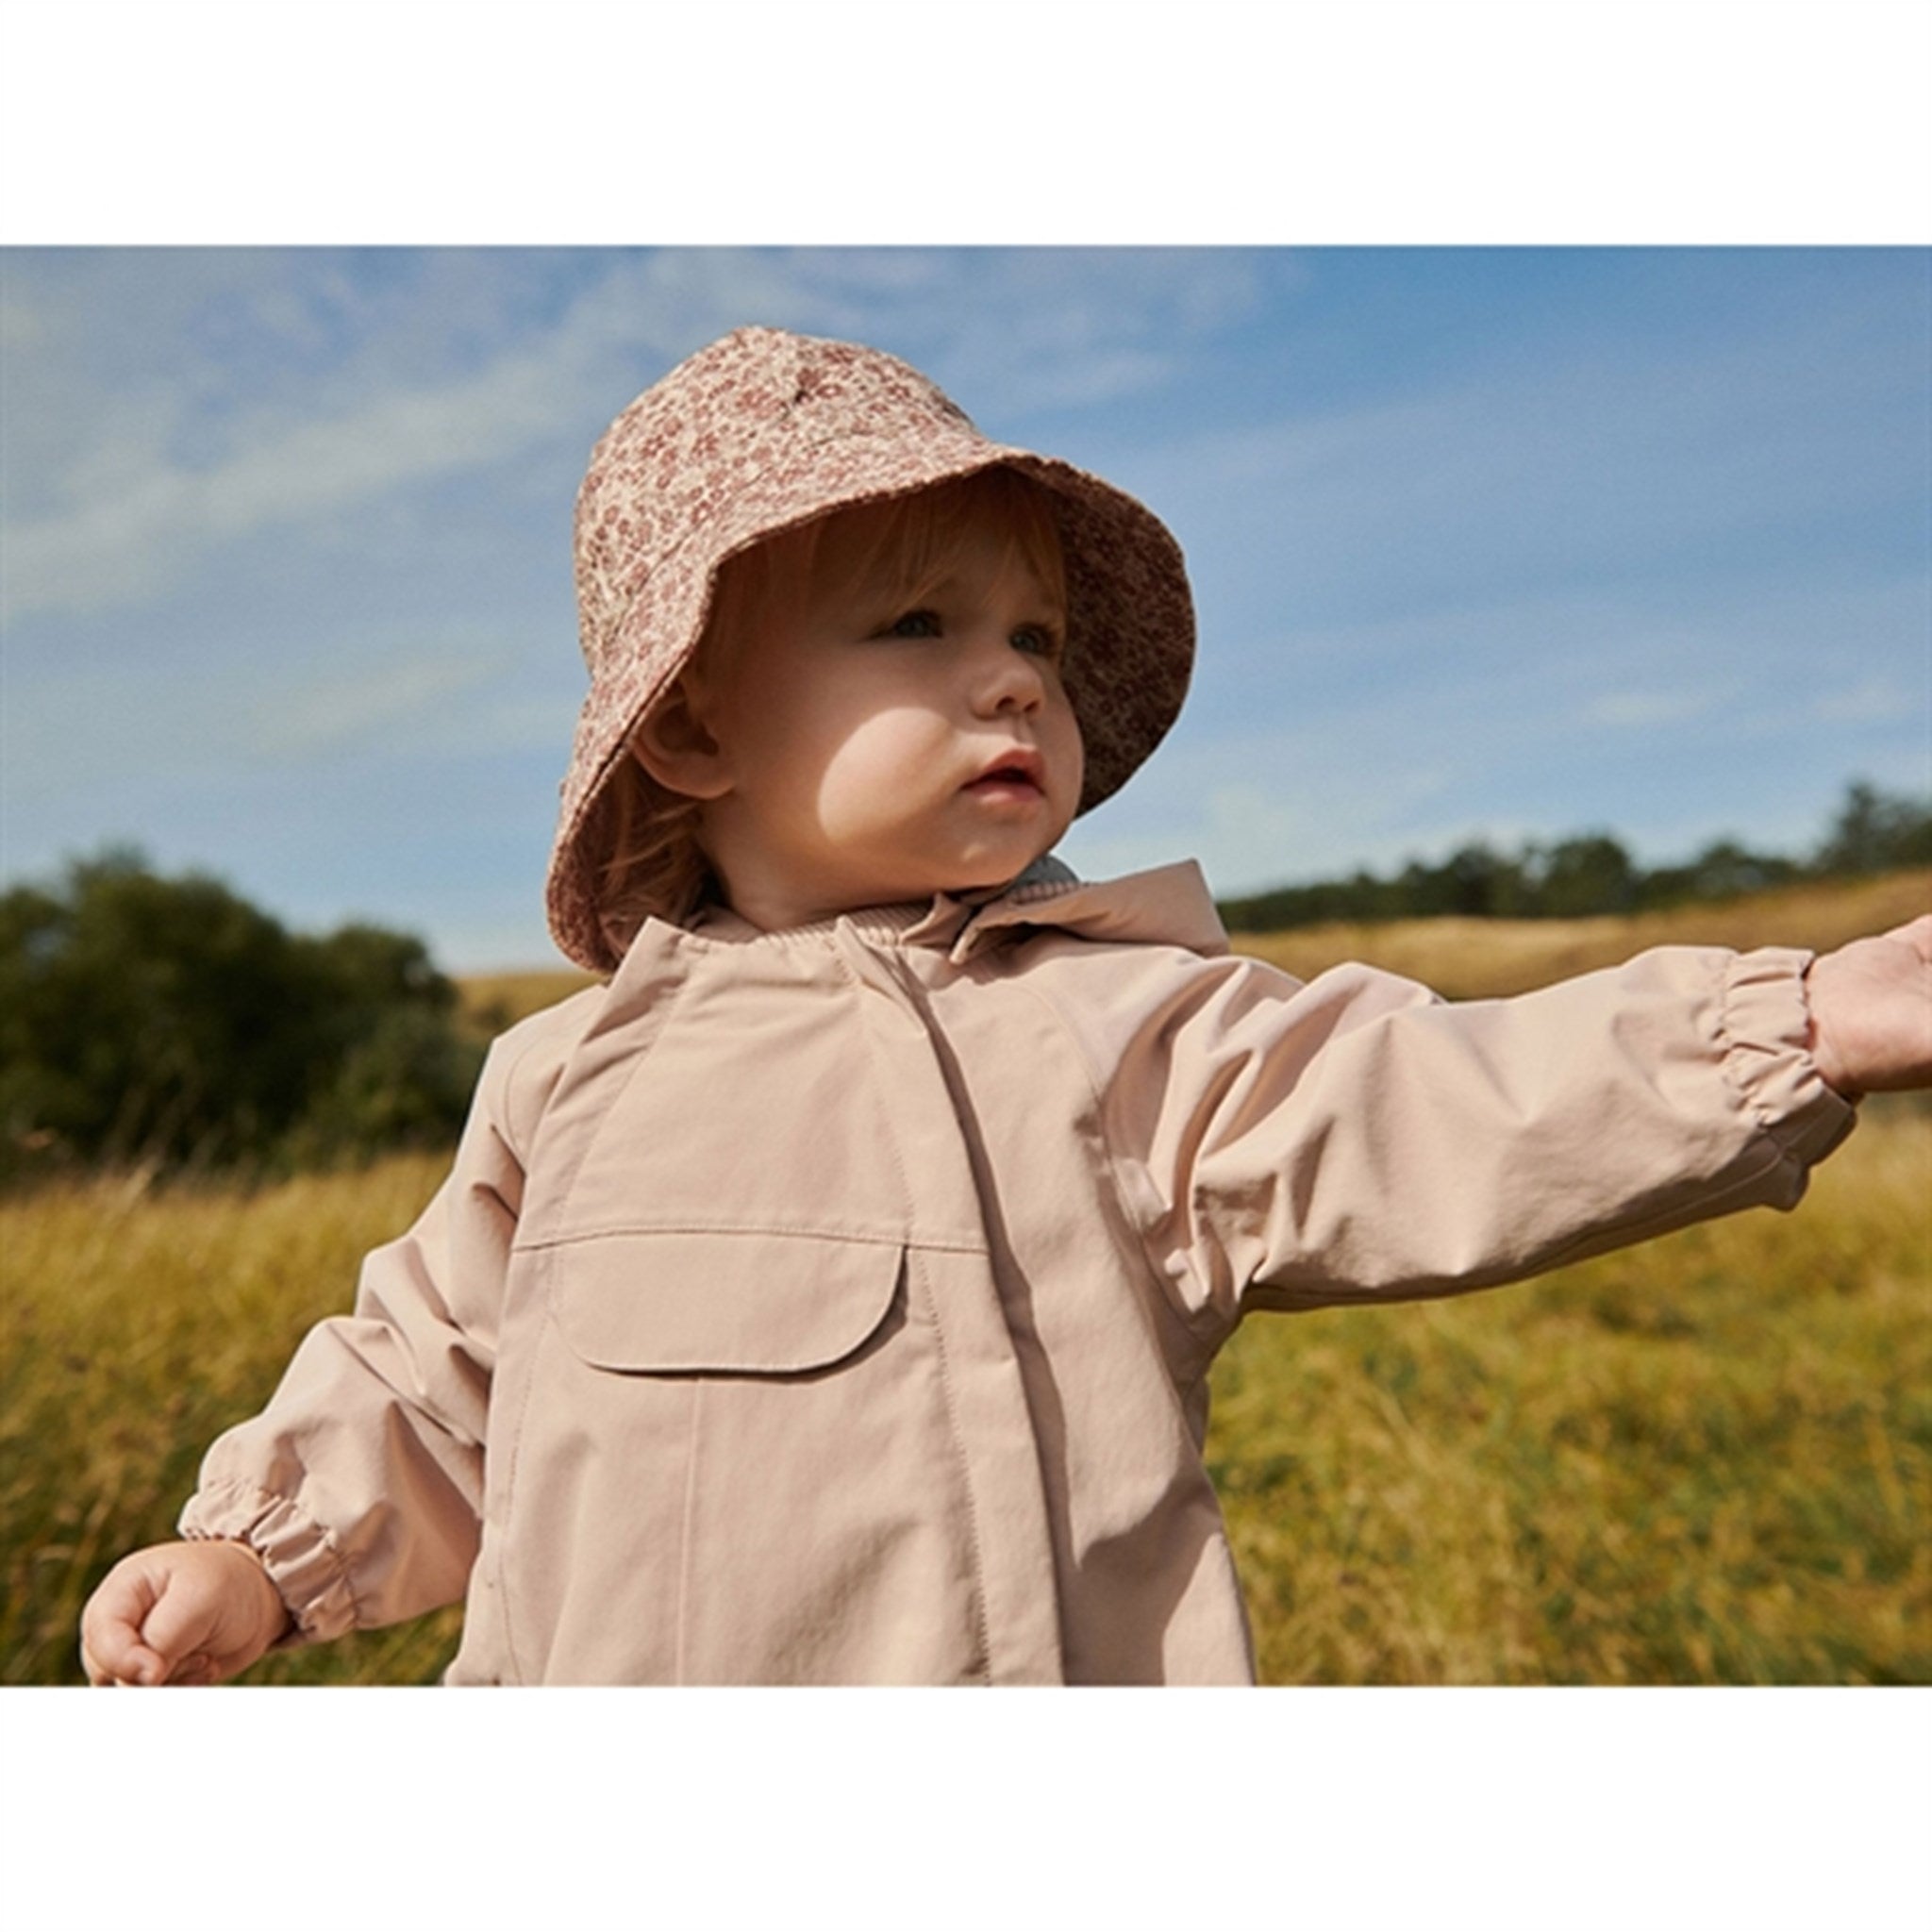 Wheat Outdoor Suit Olly Tech Rose Dust 6